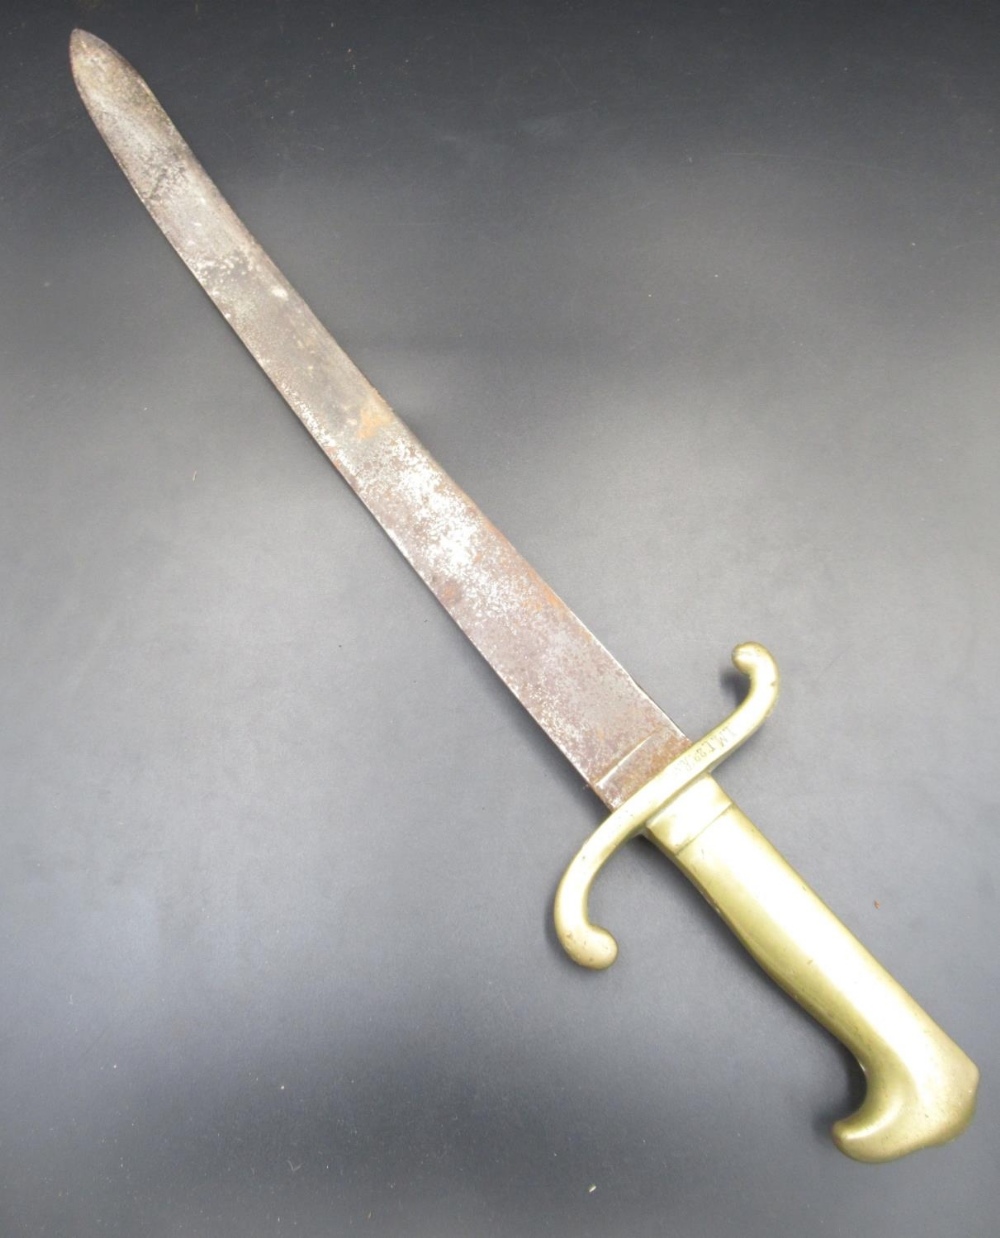 Imperial German 1871 pattern Faschinenmesser, missing original scabbard. With light age-related wear